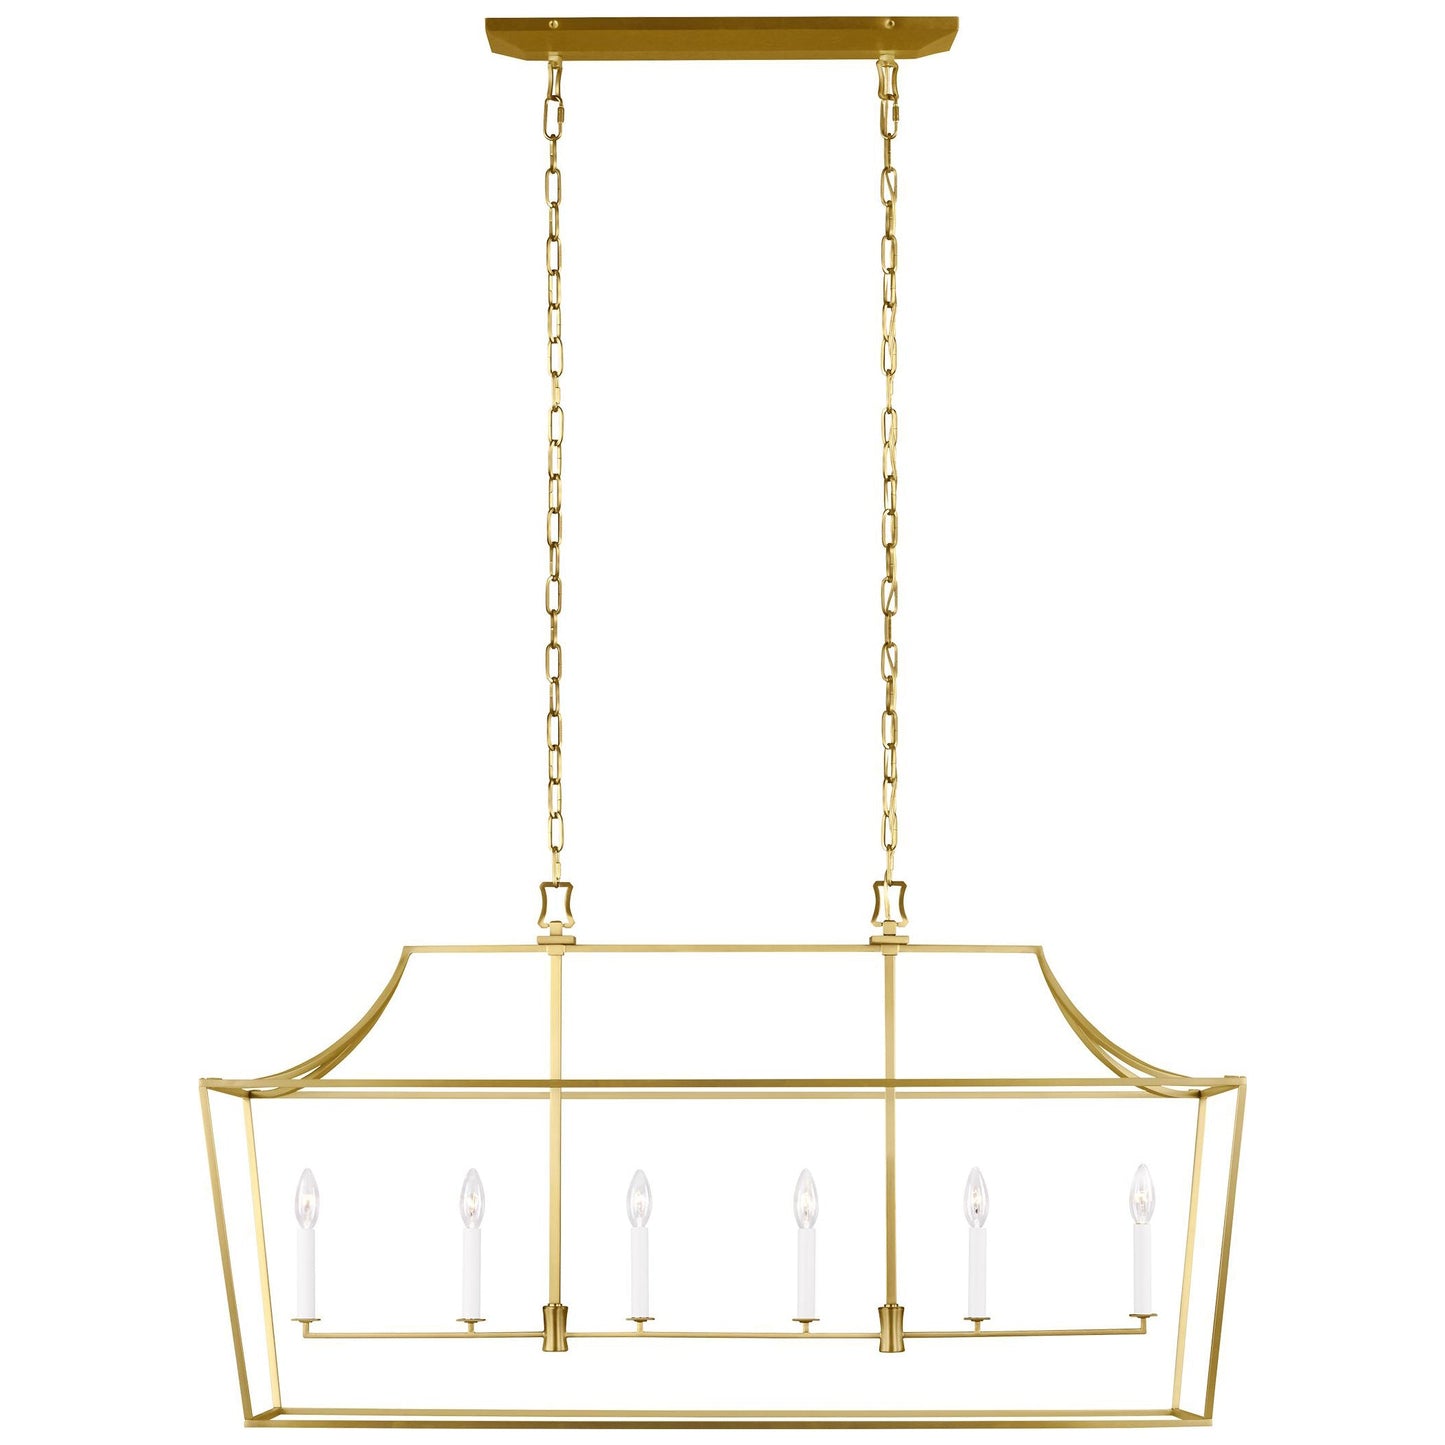 Chapman and Myers Southold Linear Chandelier